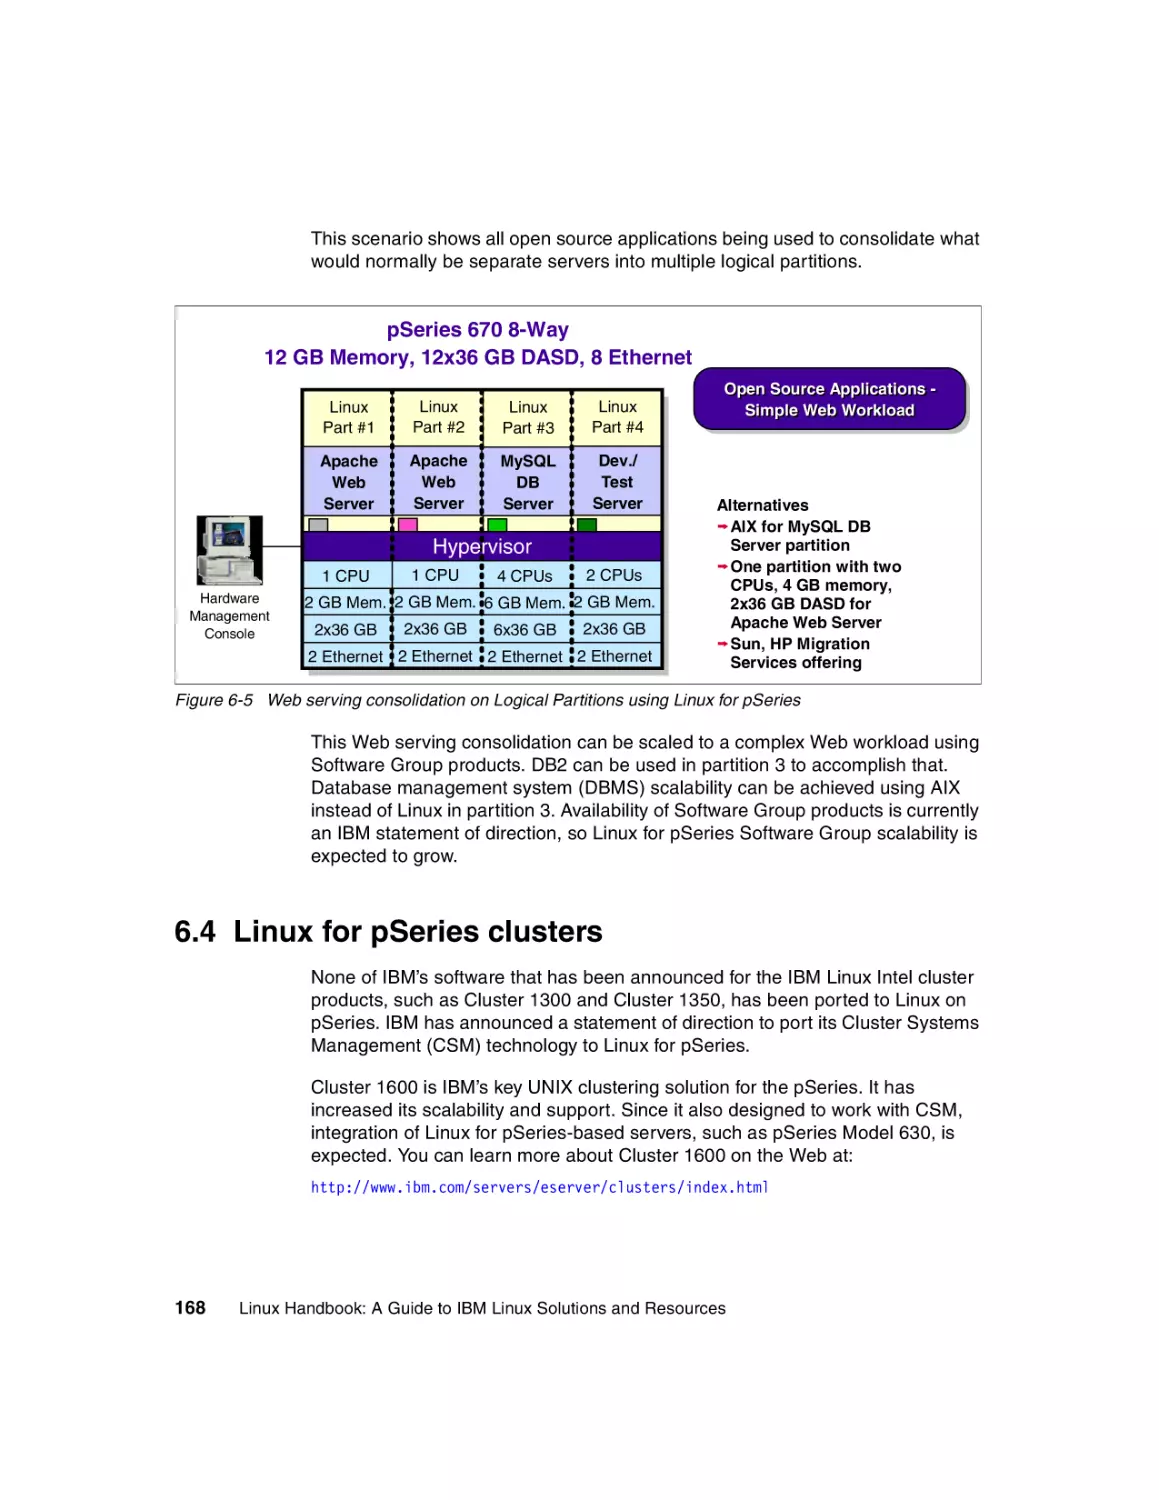 6.4 Linux for pSeries clusters